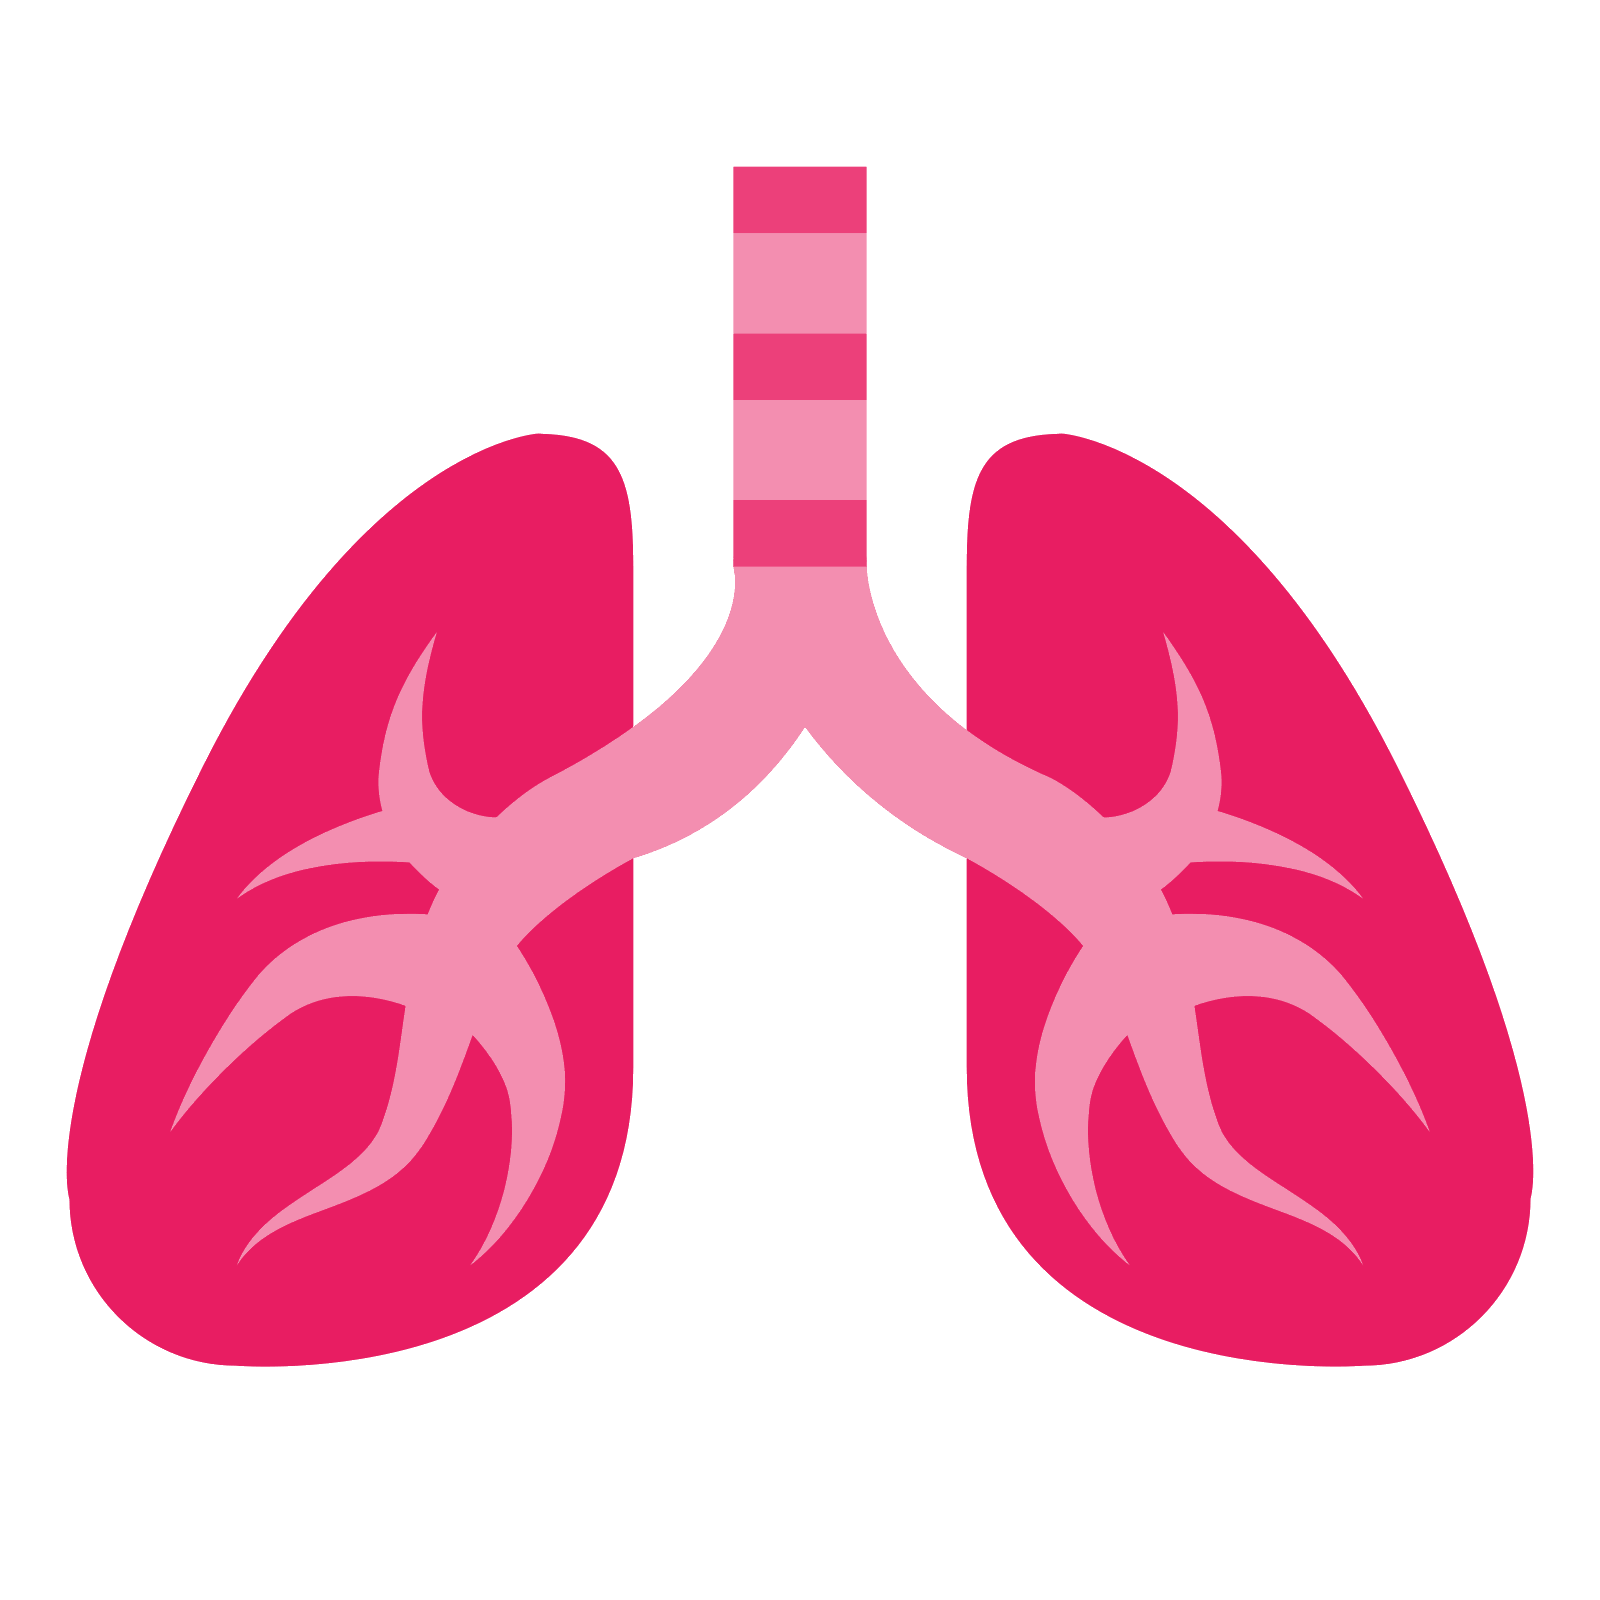 Lungs Png Lungs Clipart Transparent Png Kindpng Images